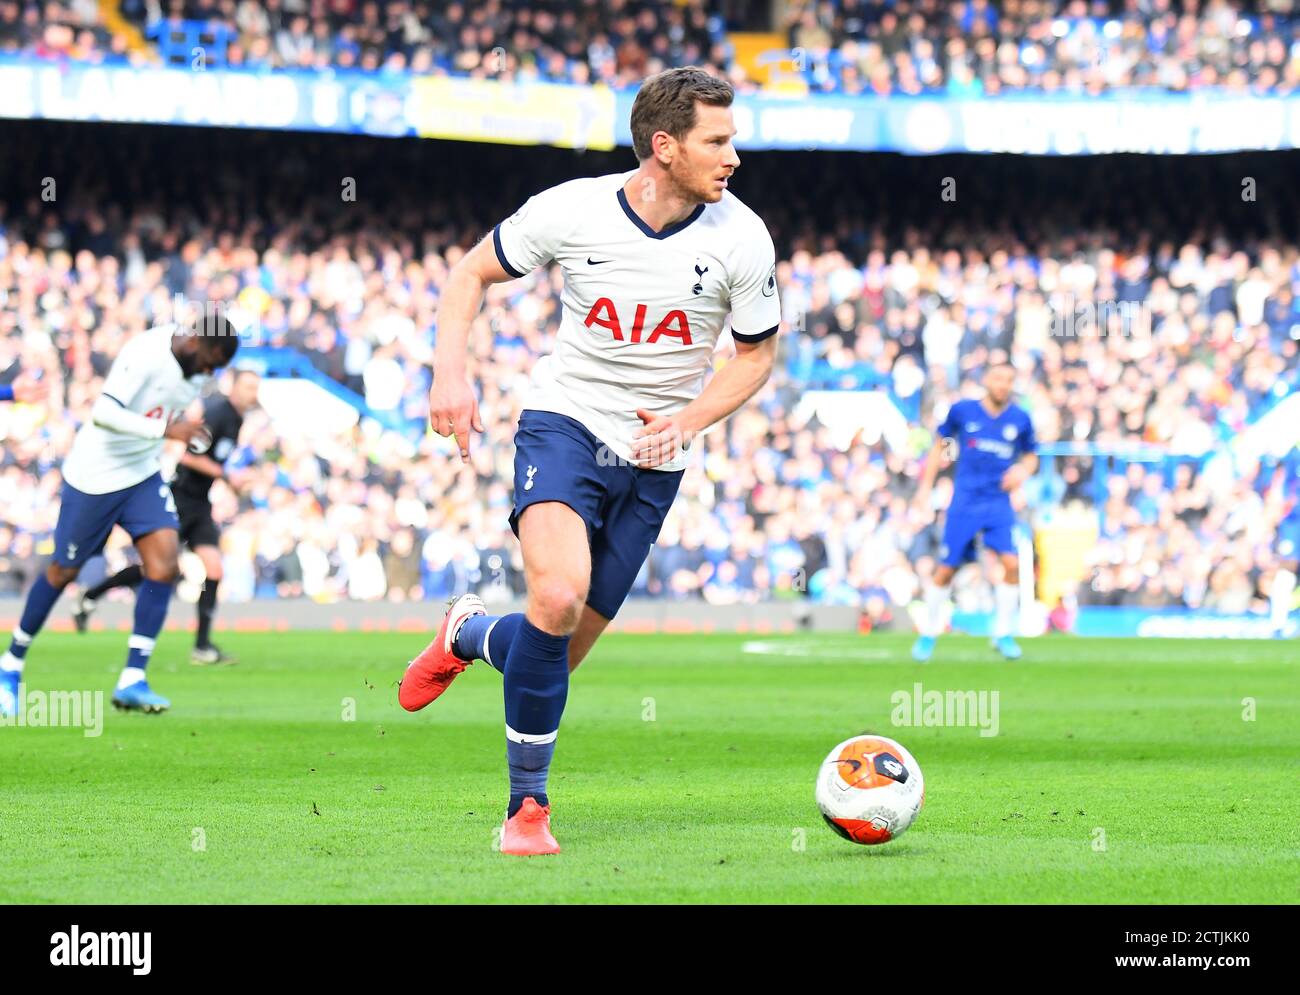 LONDON, ENGLAND - FEBRUARY 22, 2020: Jan Vertonghen of Tottenham pictured during the 2019/20 Premier League game between Chelsea FC and Tottenham Hotspur FC at Stamford Bridge. Stock Photo